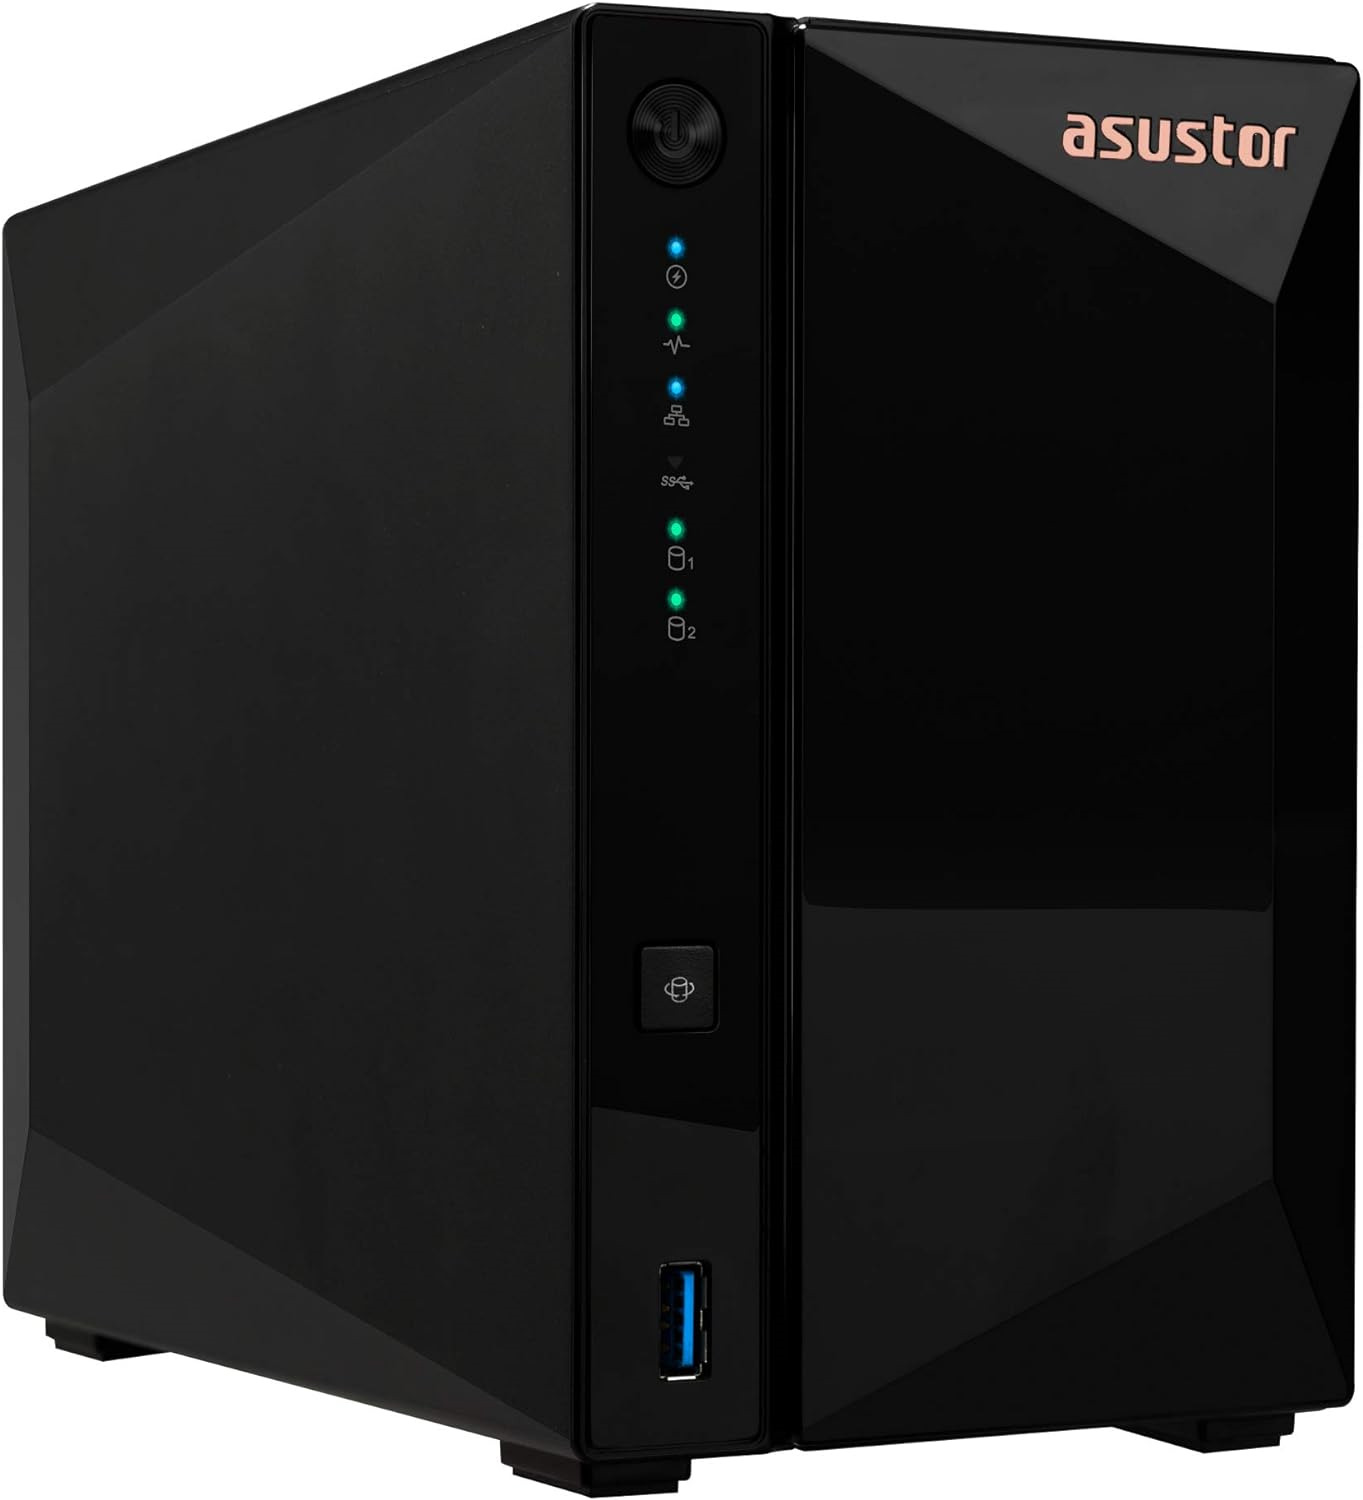 Asustor Drivestor 2 Pro AS3302T - 2 Bay NAS, 1.4GHz Quad Core, 2.5GbE Port, 2GB